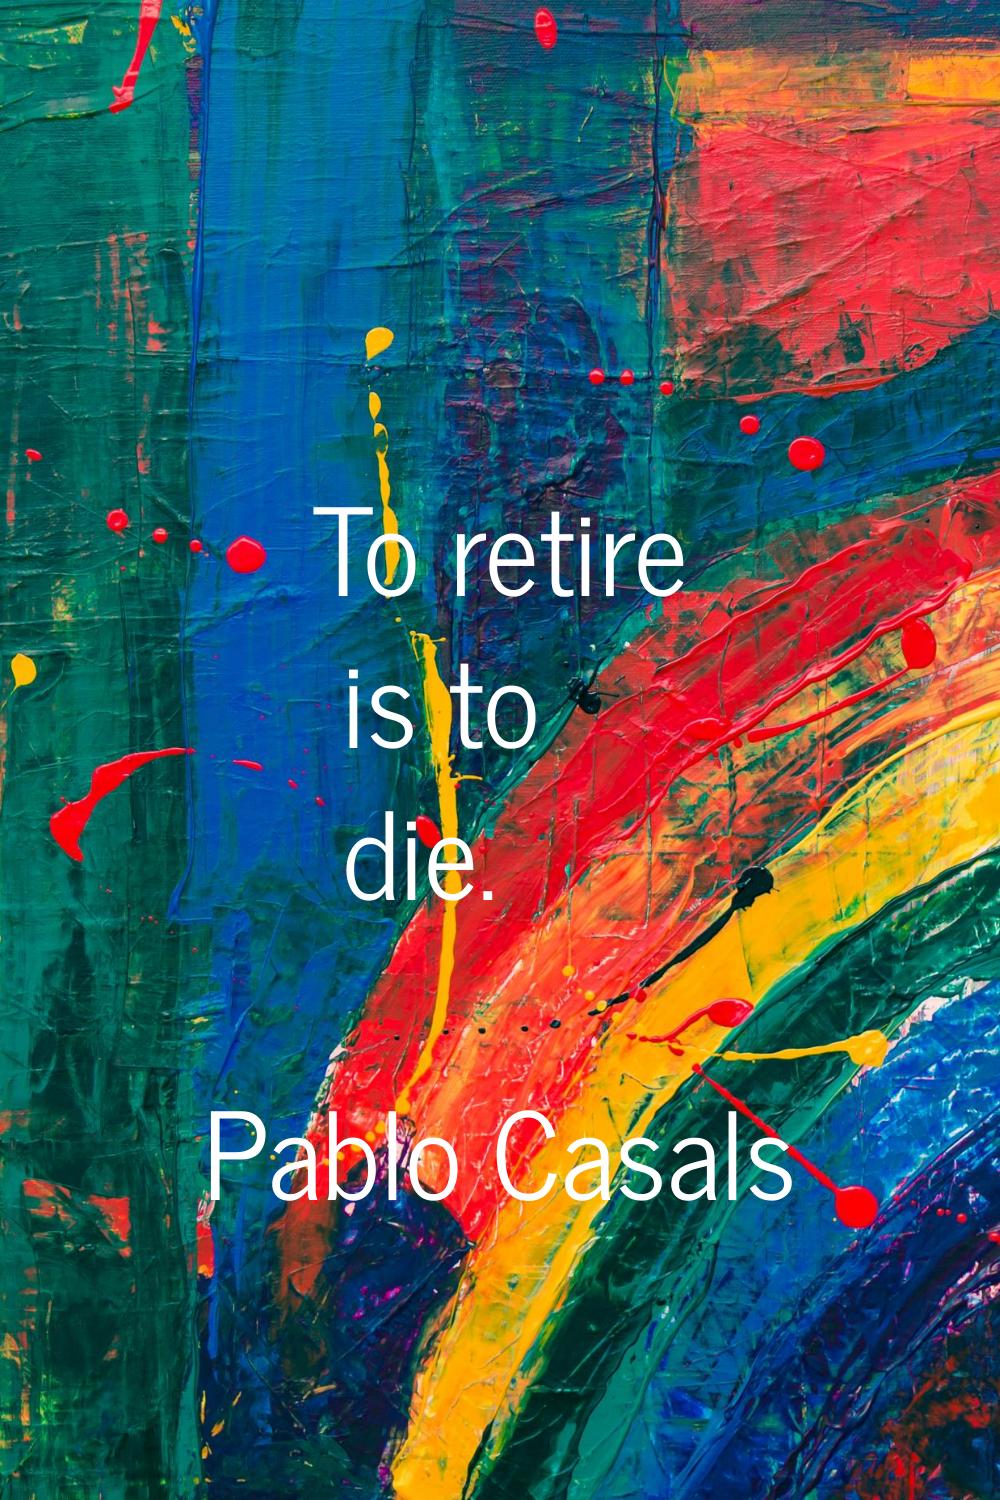 To retire is to die.